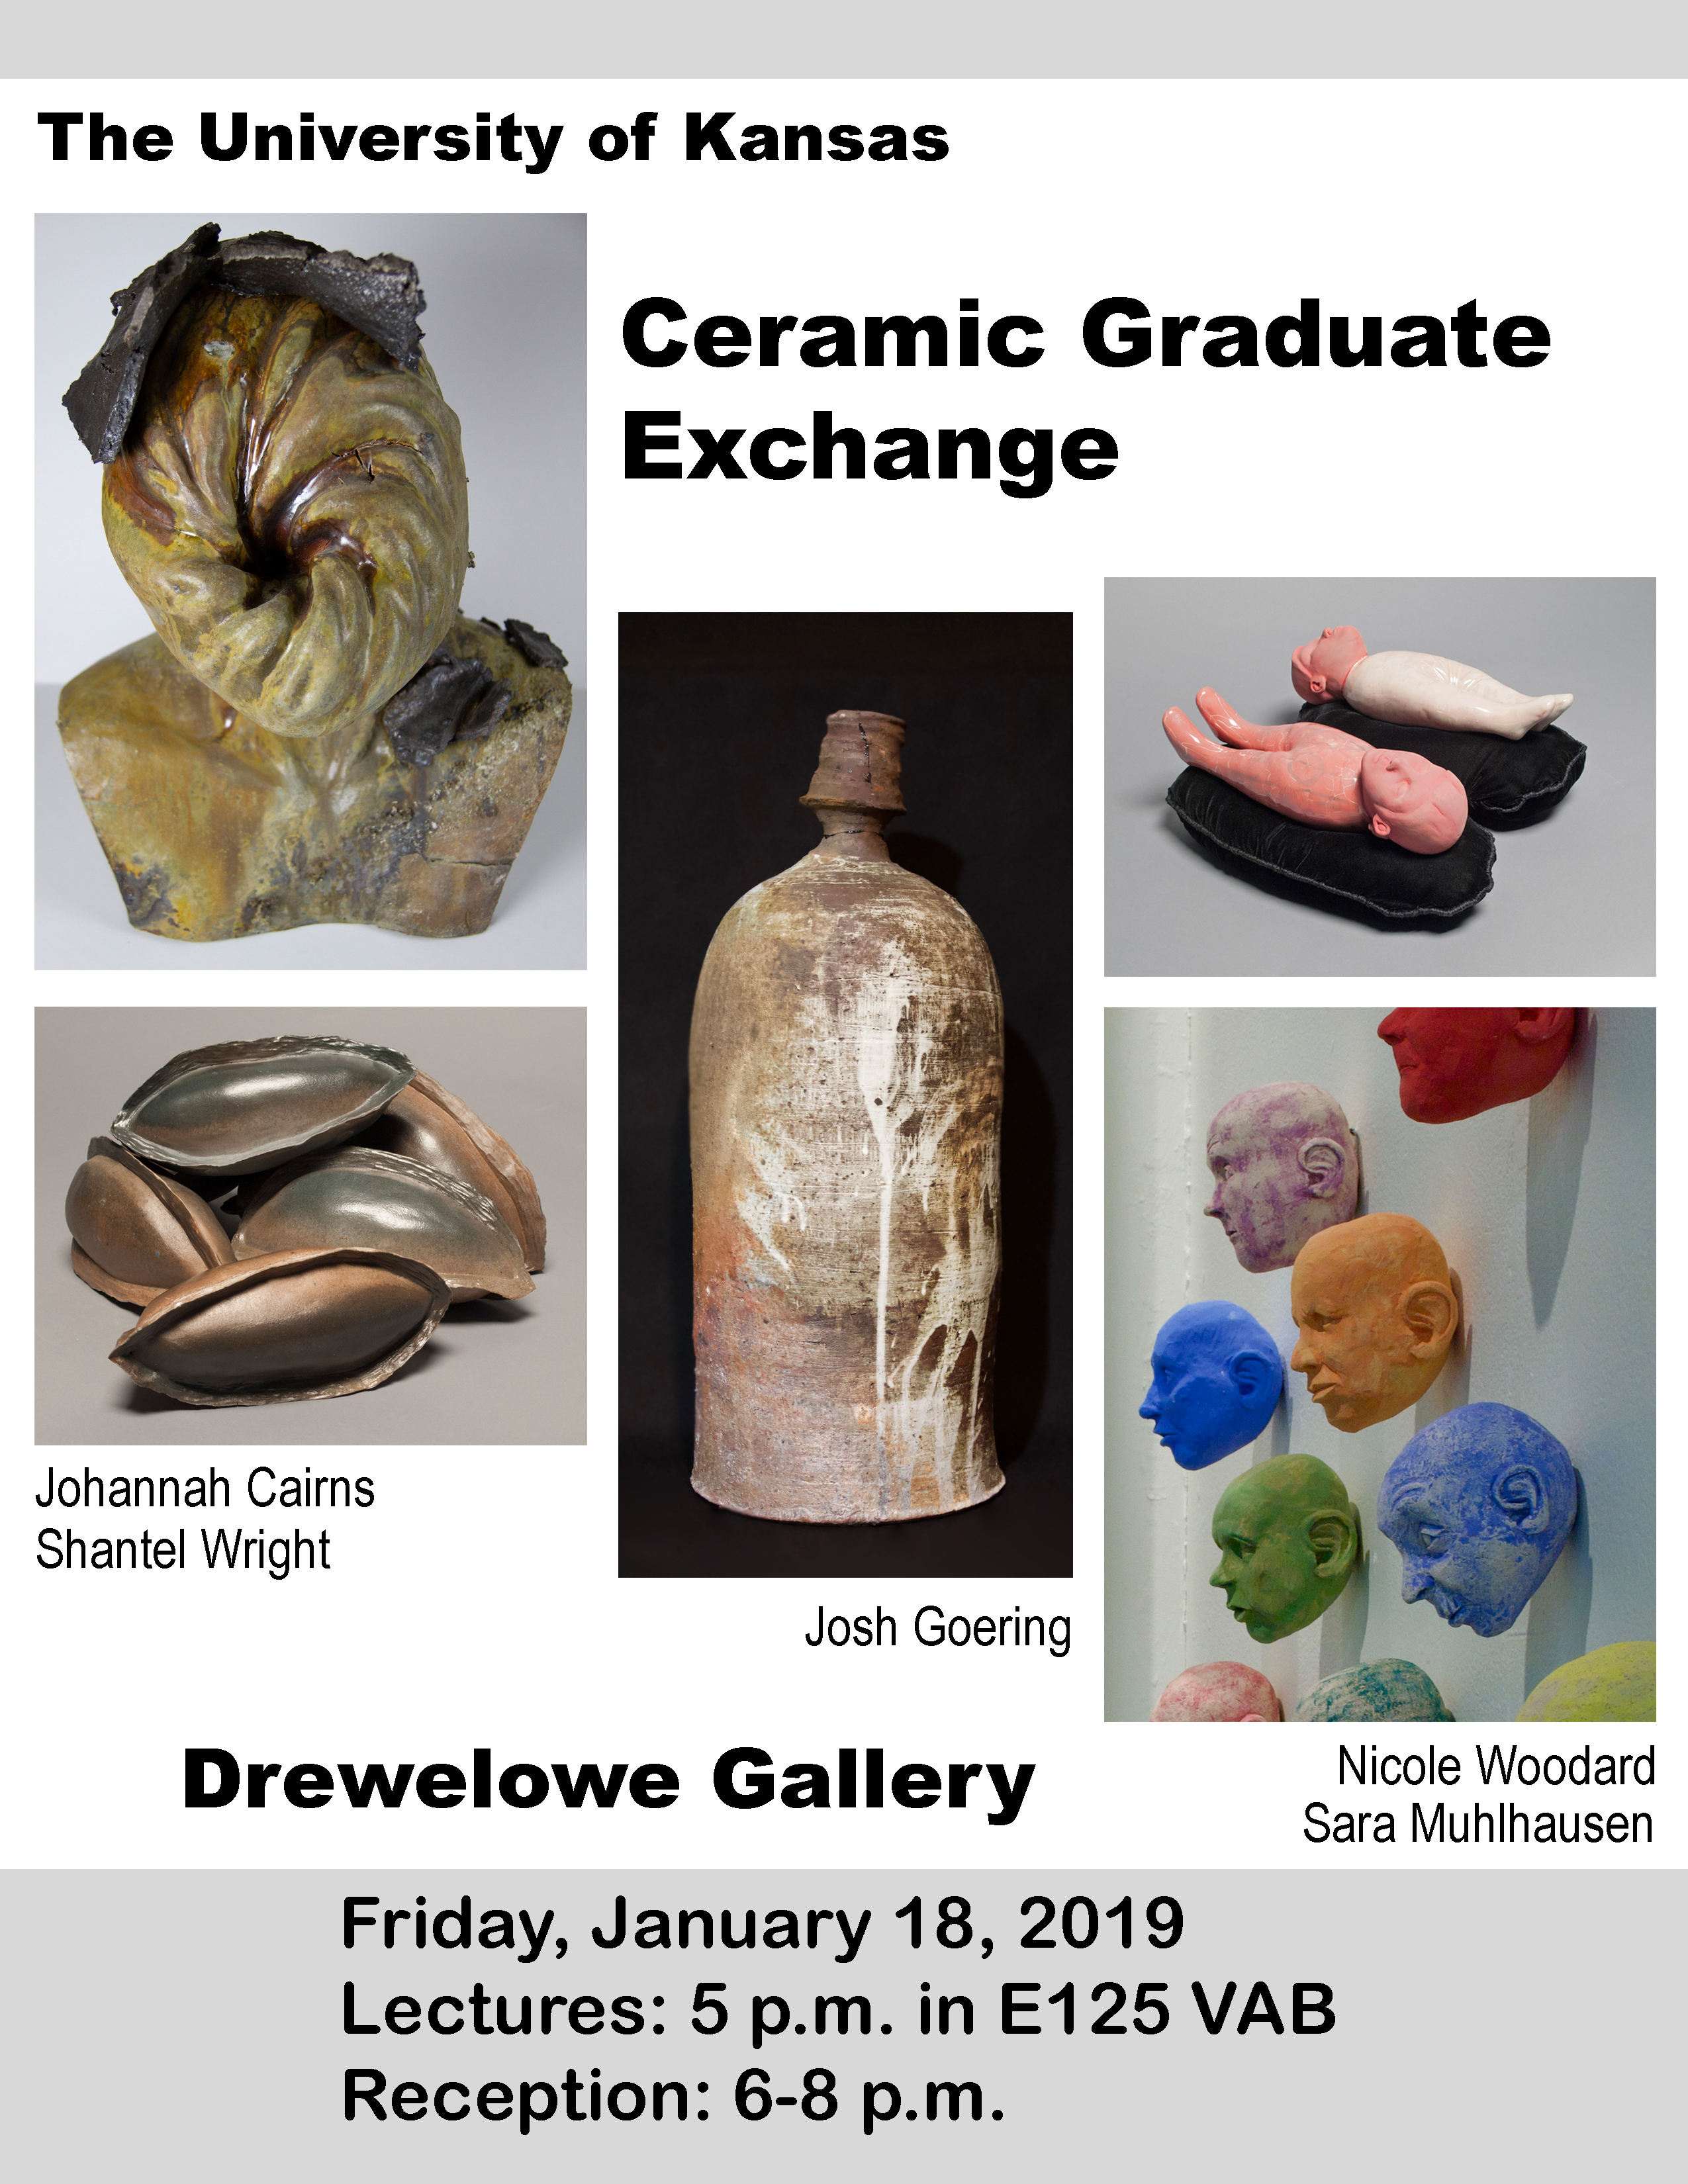 Poster for The University of Kansas Ceramic Graduate Exchange Johannah Cairns, Shantel Wright, Josh Goering, Nicole Woodard and Sara Muhlhausen Lecture Friday January 18, 2019 Lecture 5:00 PM E125 VAB Reception 6:00-8:00 PM